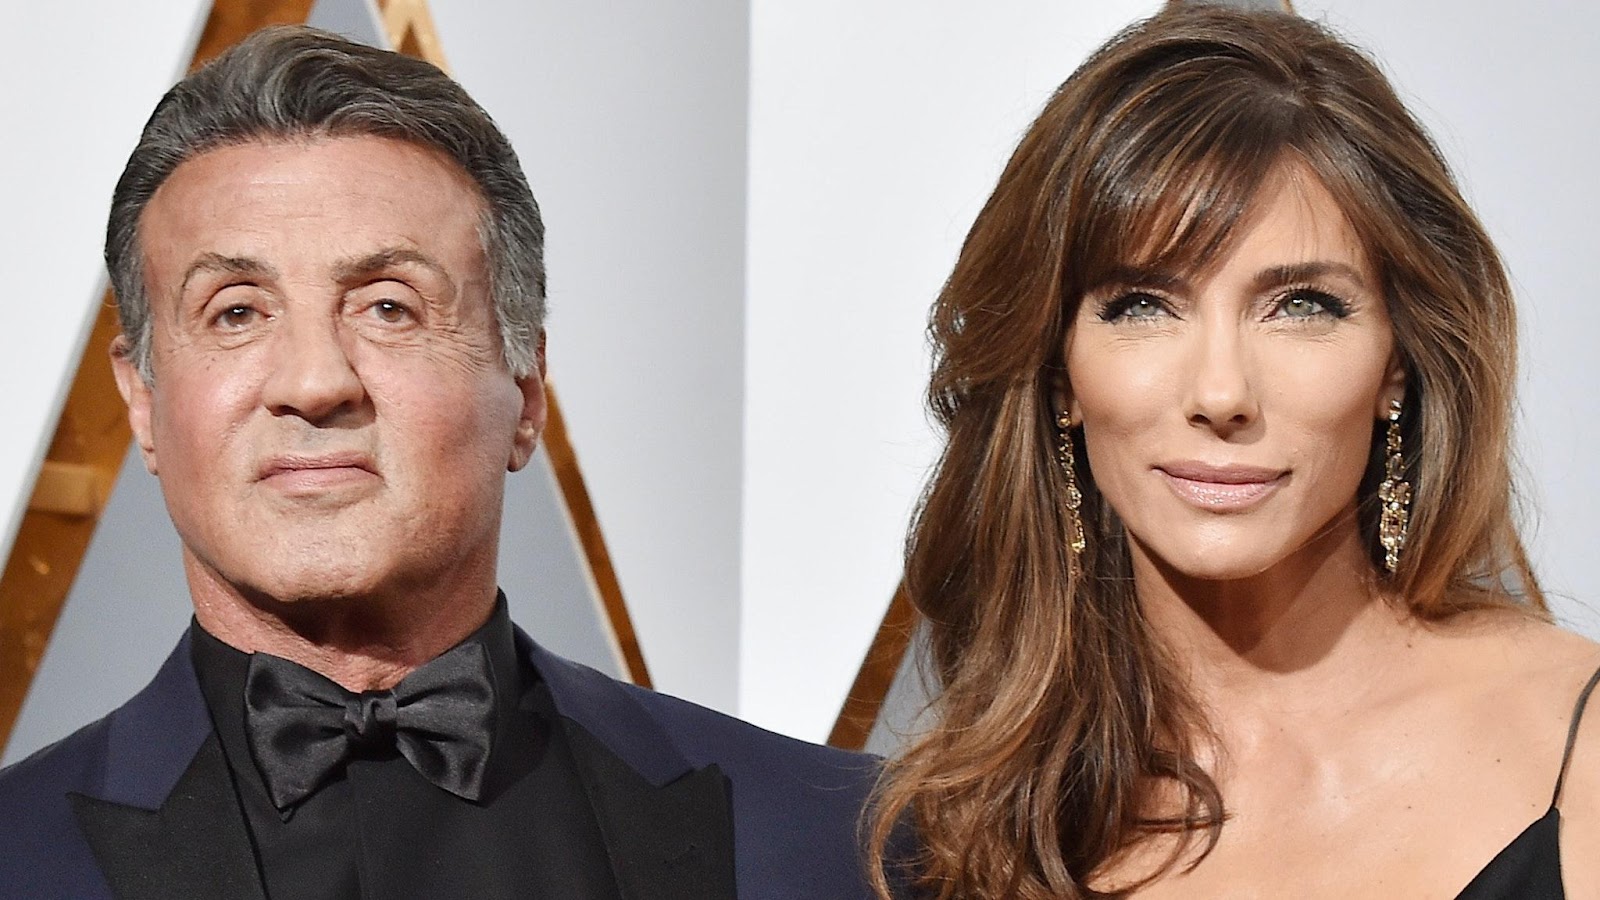 Actor Sylvester Stallone (L) and Jennifer Flavin attends the 88th Annual Academy Awards at Hollywood & Highland Center on February 28, 2016 in Hollywood, California.